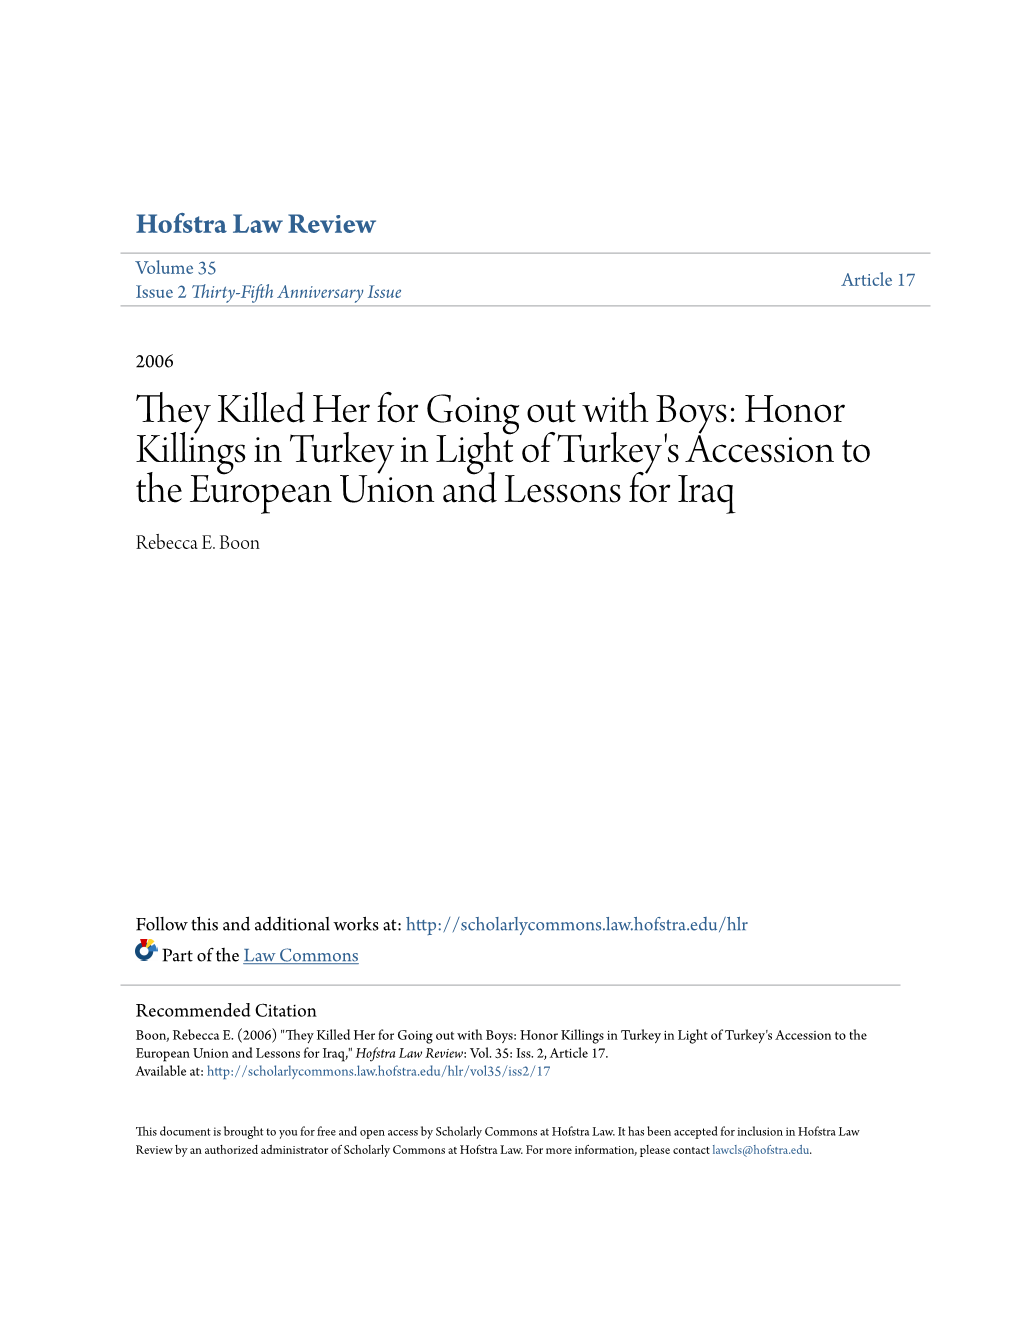 They Killed Her for Going out with Boys: Honor Killings in Turkey in Light of Turkey's Accession to the European Union and Lessons for Iraq Rebecca E